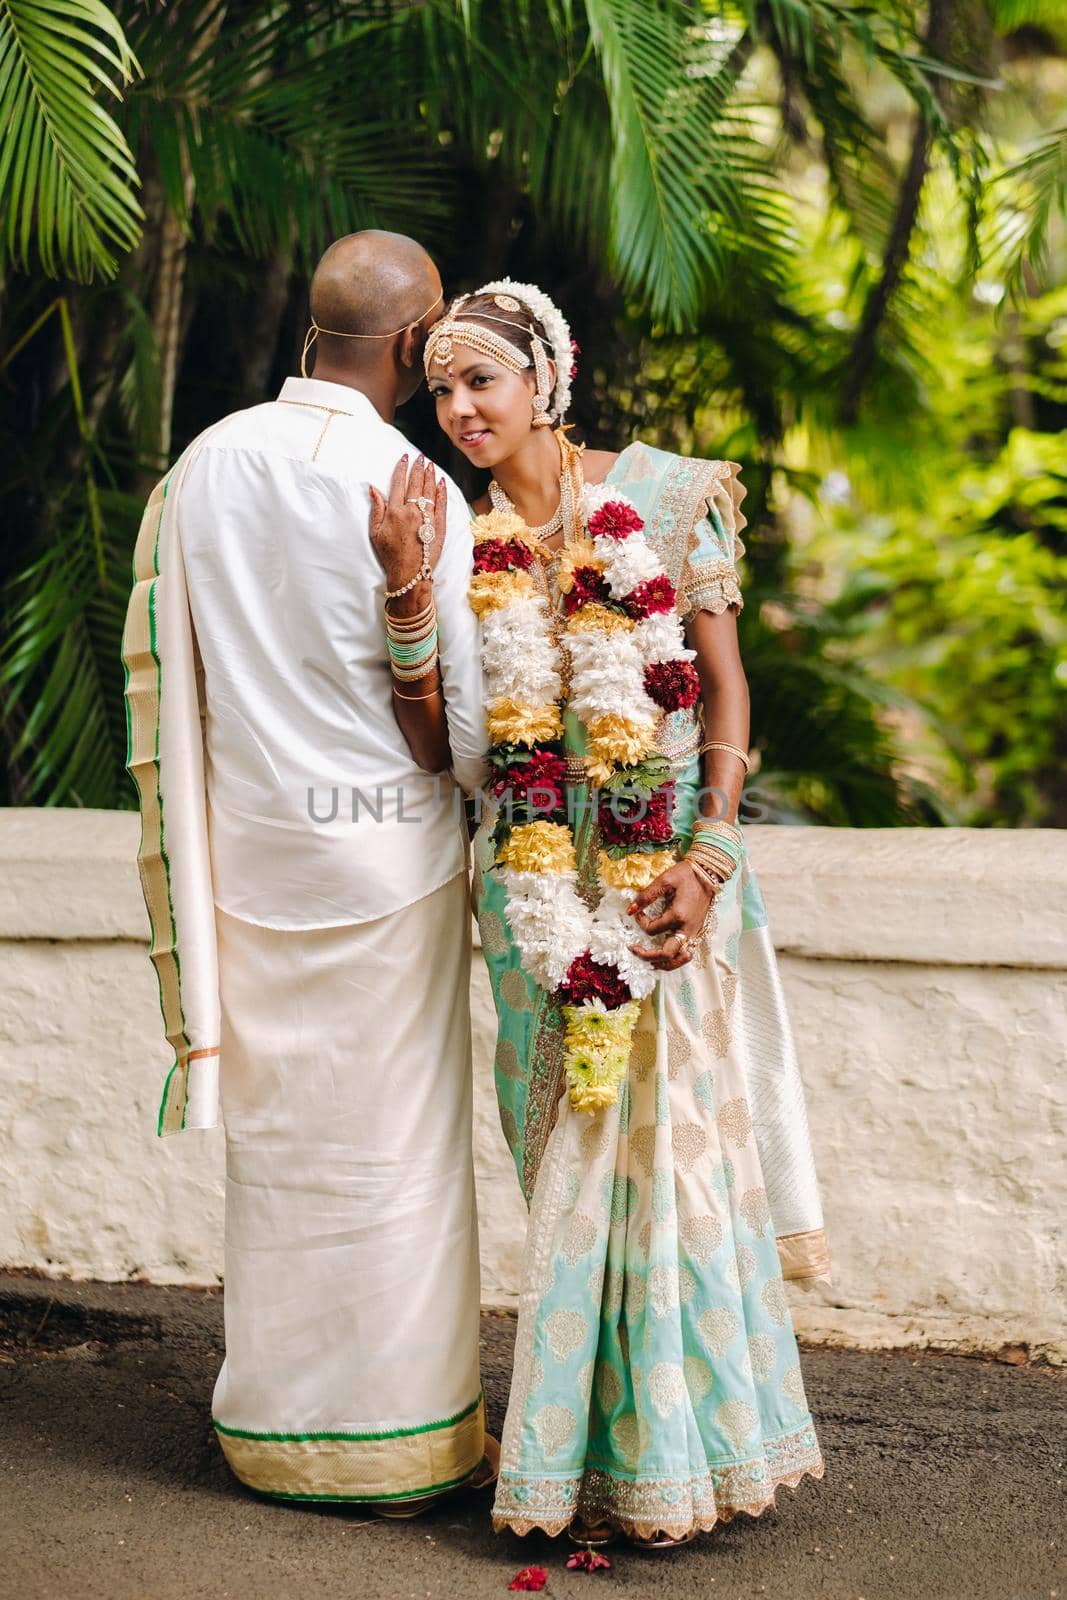 December 8, 2019.Mauritius.The bride and groom in national Mauritian outfits at the Botanical Garden on the island of Mauritius.